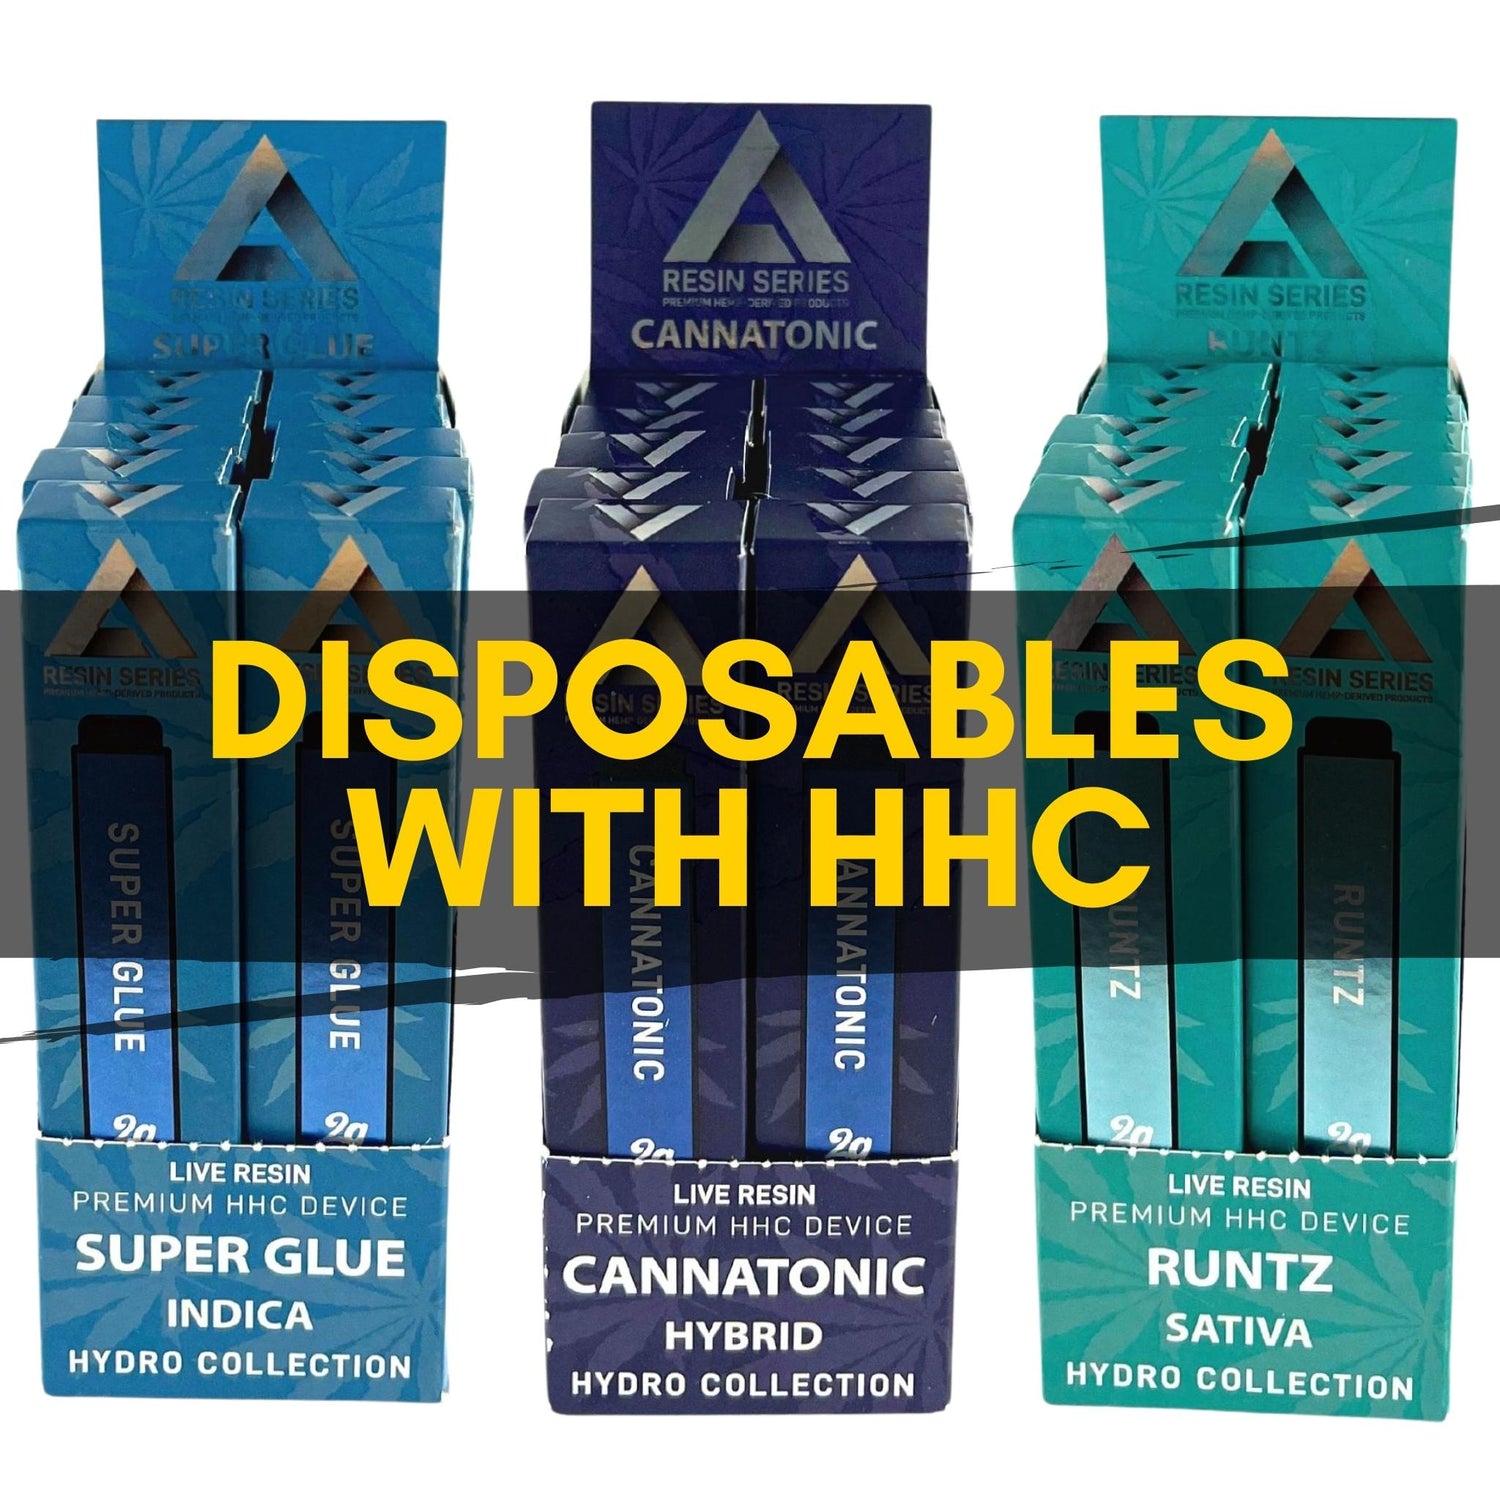 DISPOSABLES WITH HHC